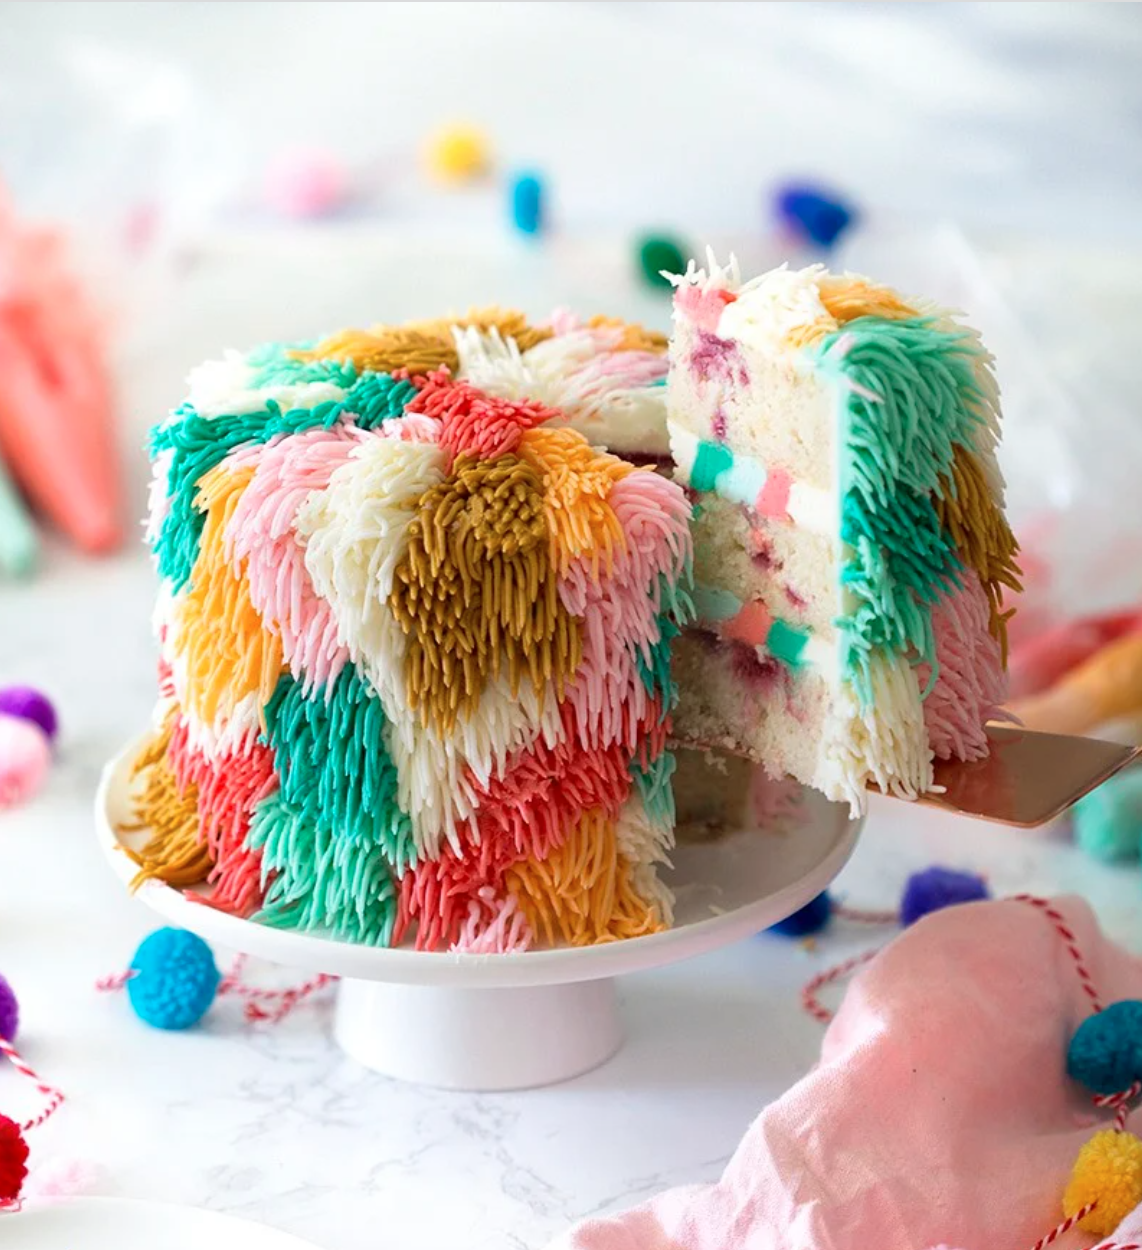 Birthday Cake Trends For 2019 (You'll Want Them ALL!) | Pretty birthday  cakes, Cute birthday cakes, Savoury cake